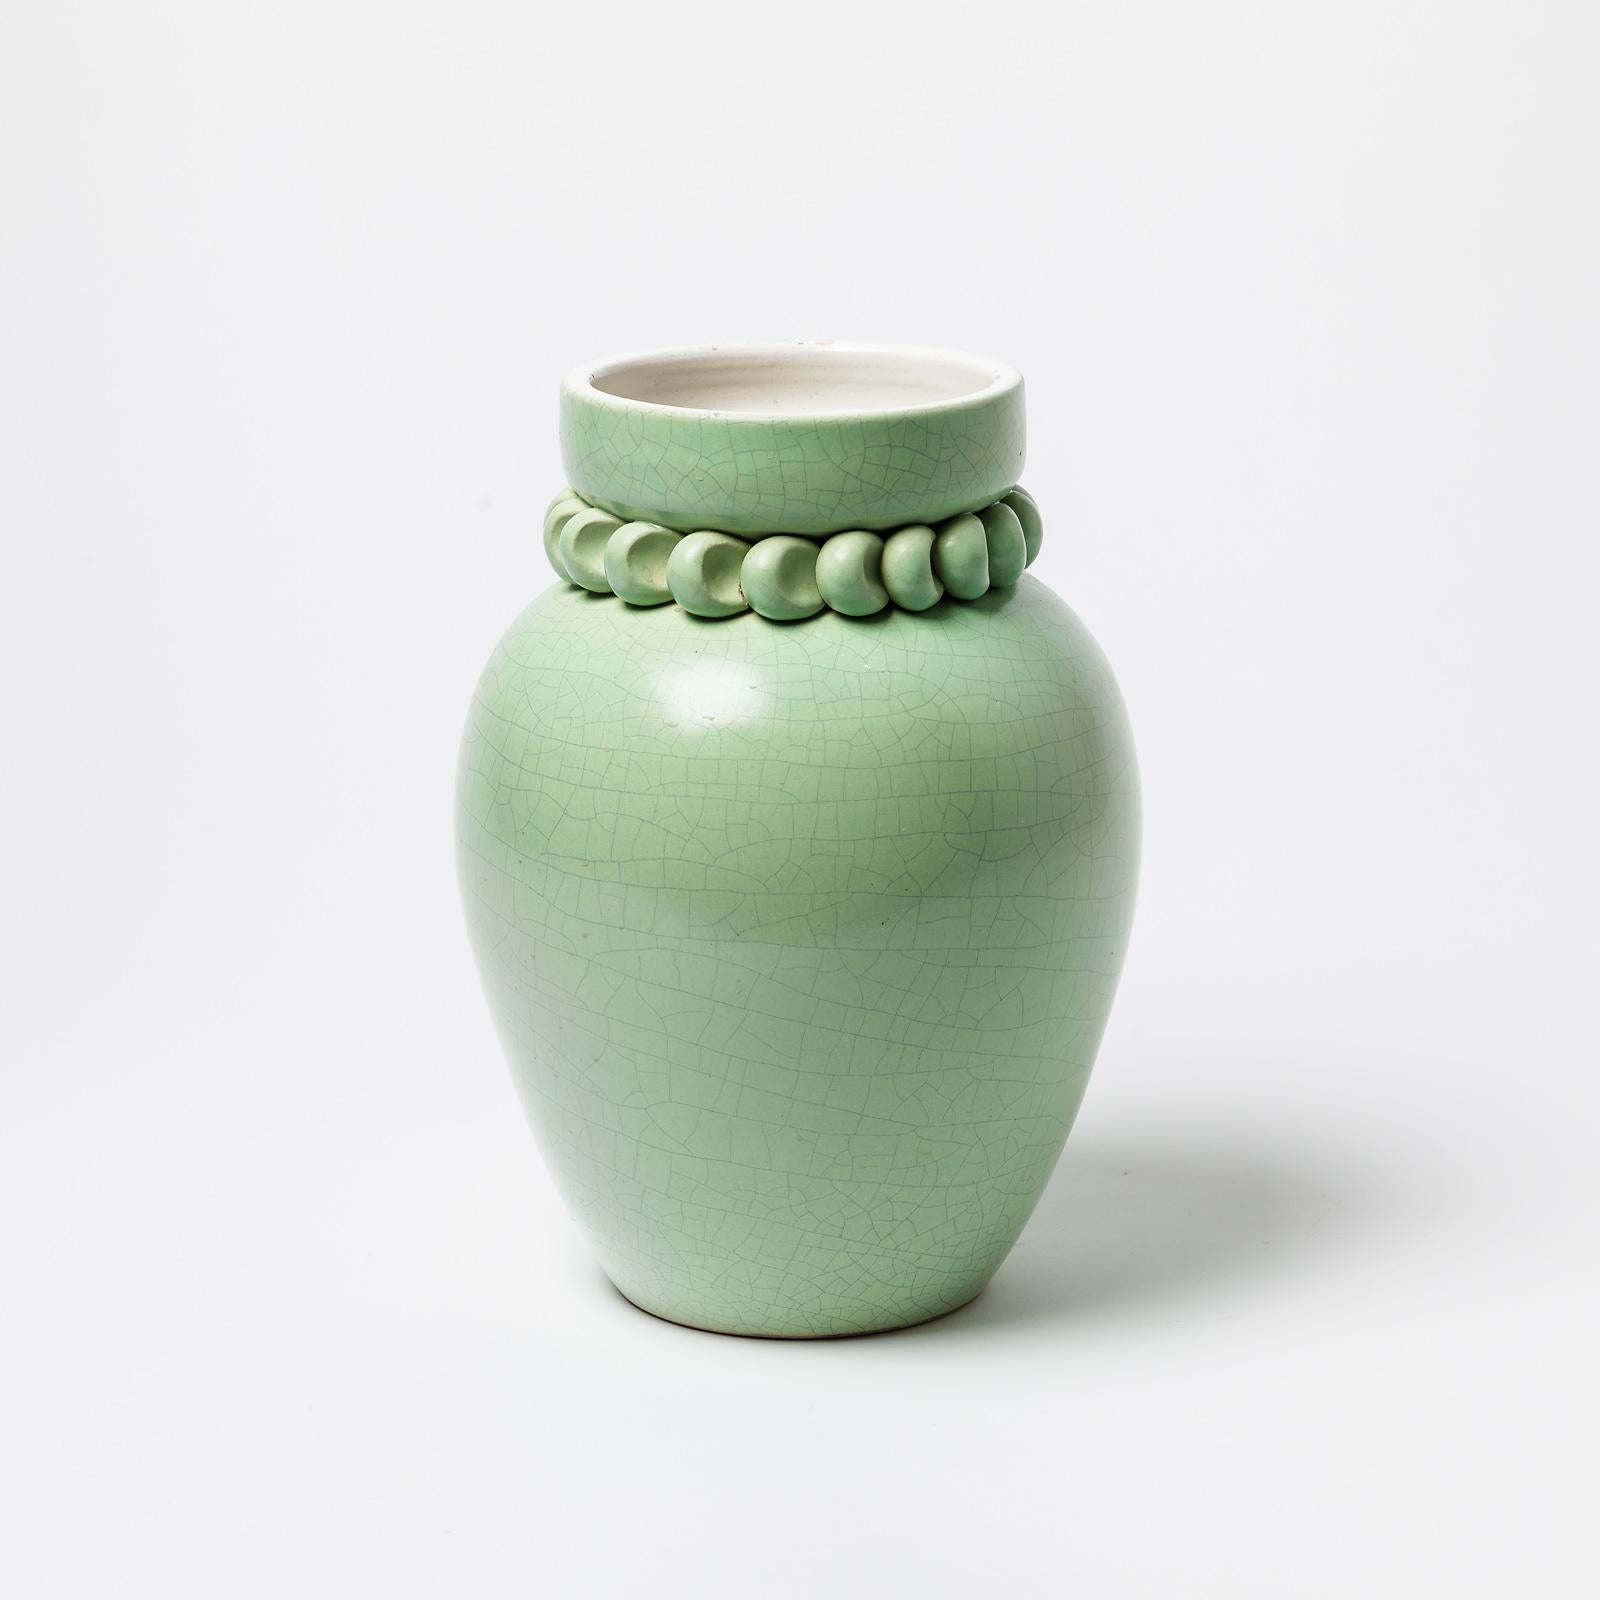 Art Deco Ceramic Vase with Green and White Glaze Decoration by Pol Chambost, circa 1930